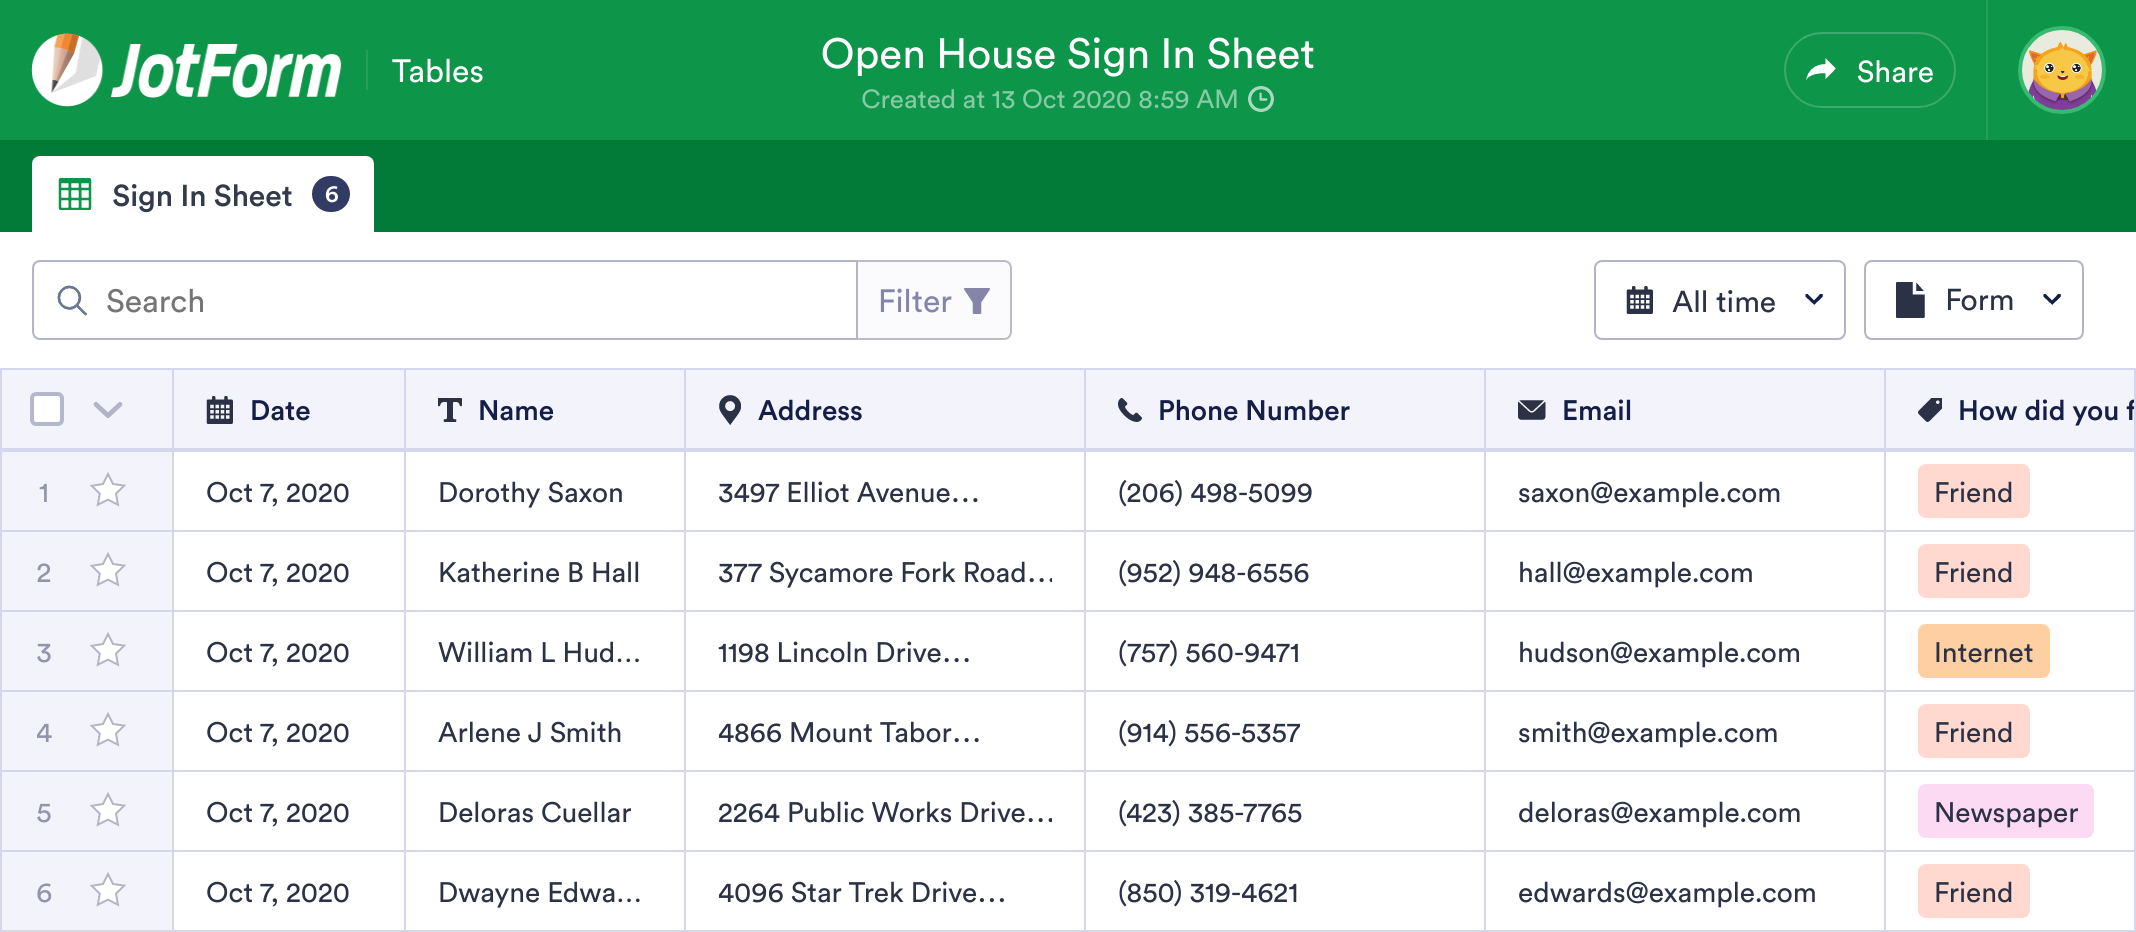 Open House Sign In Sheet Template JotForm Tables